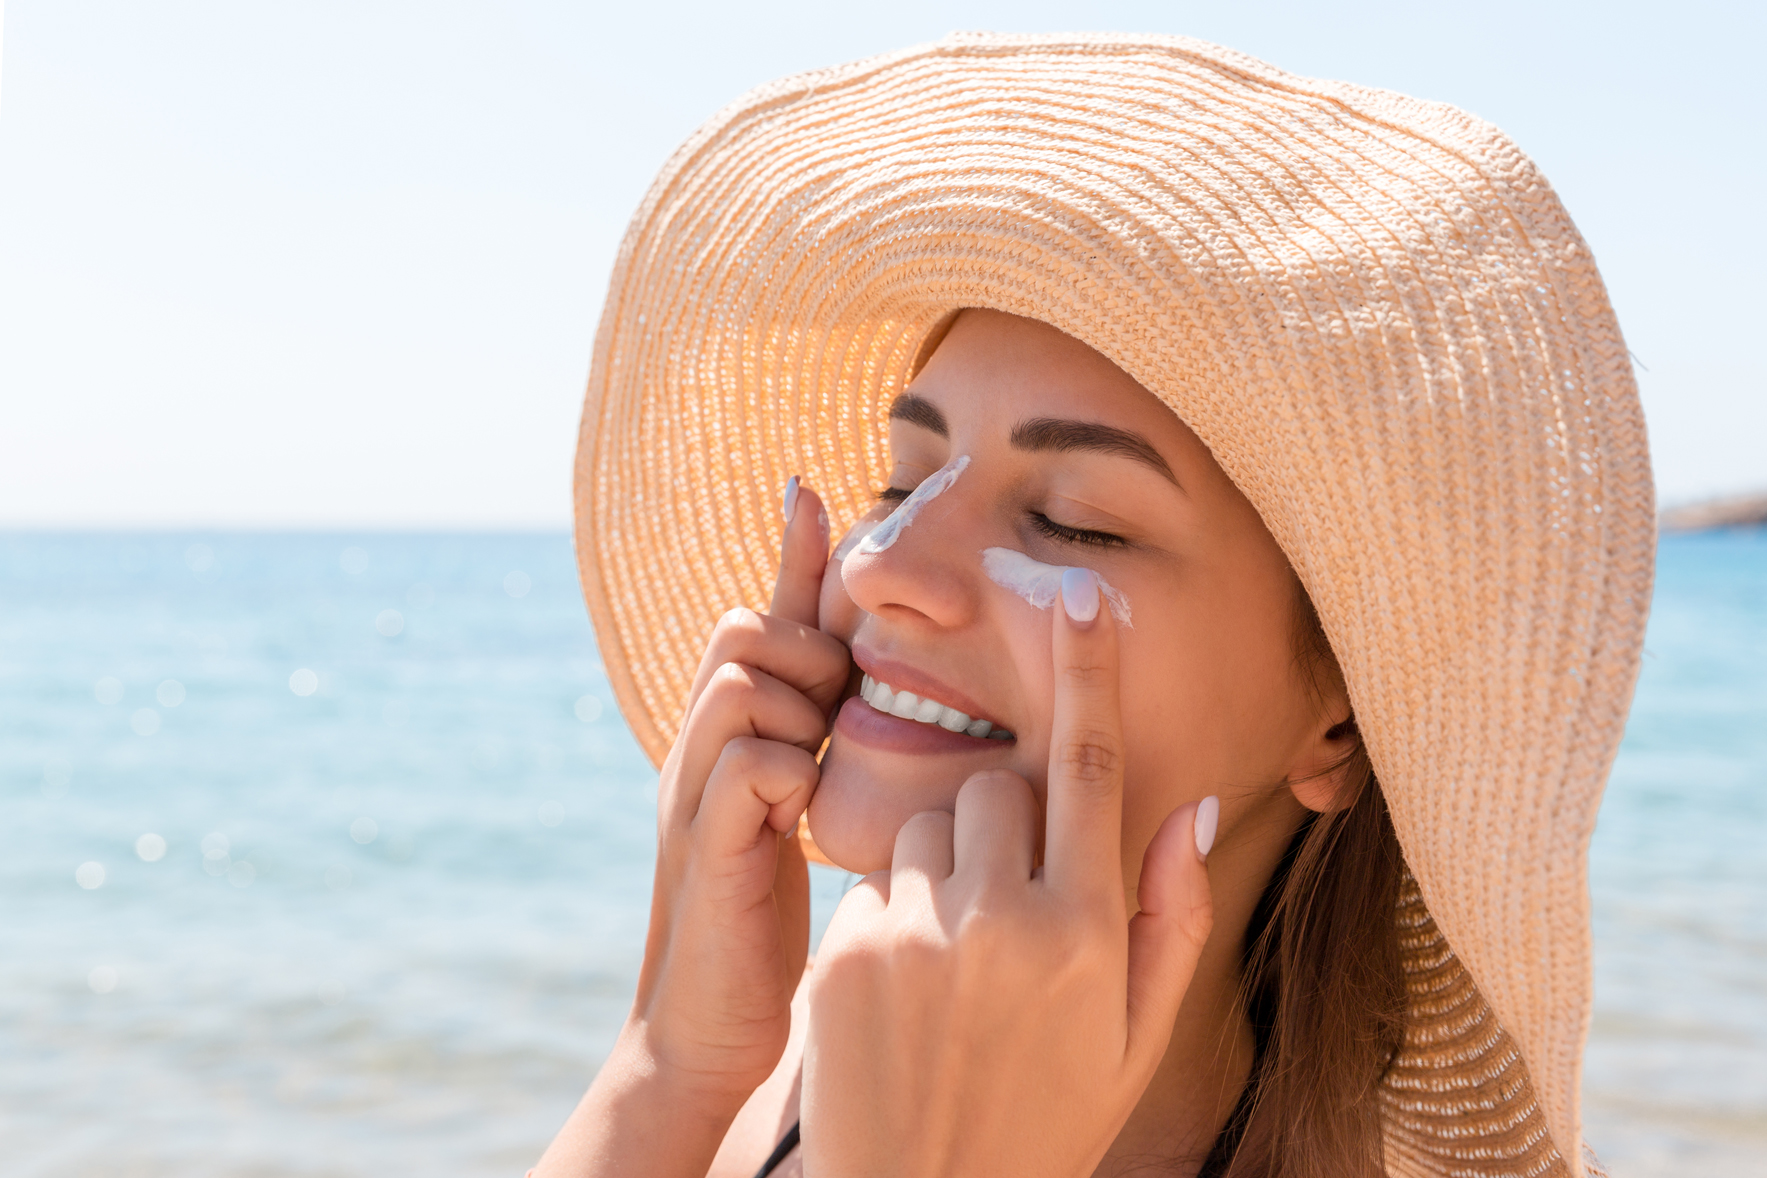 A smiling woman in a hat applies sunscreen to her face with a lake in the background.